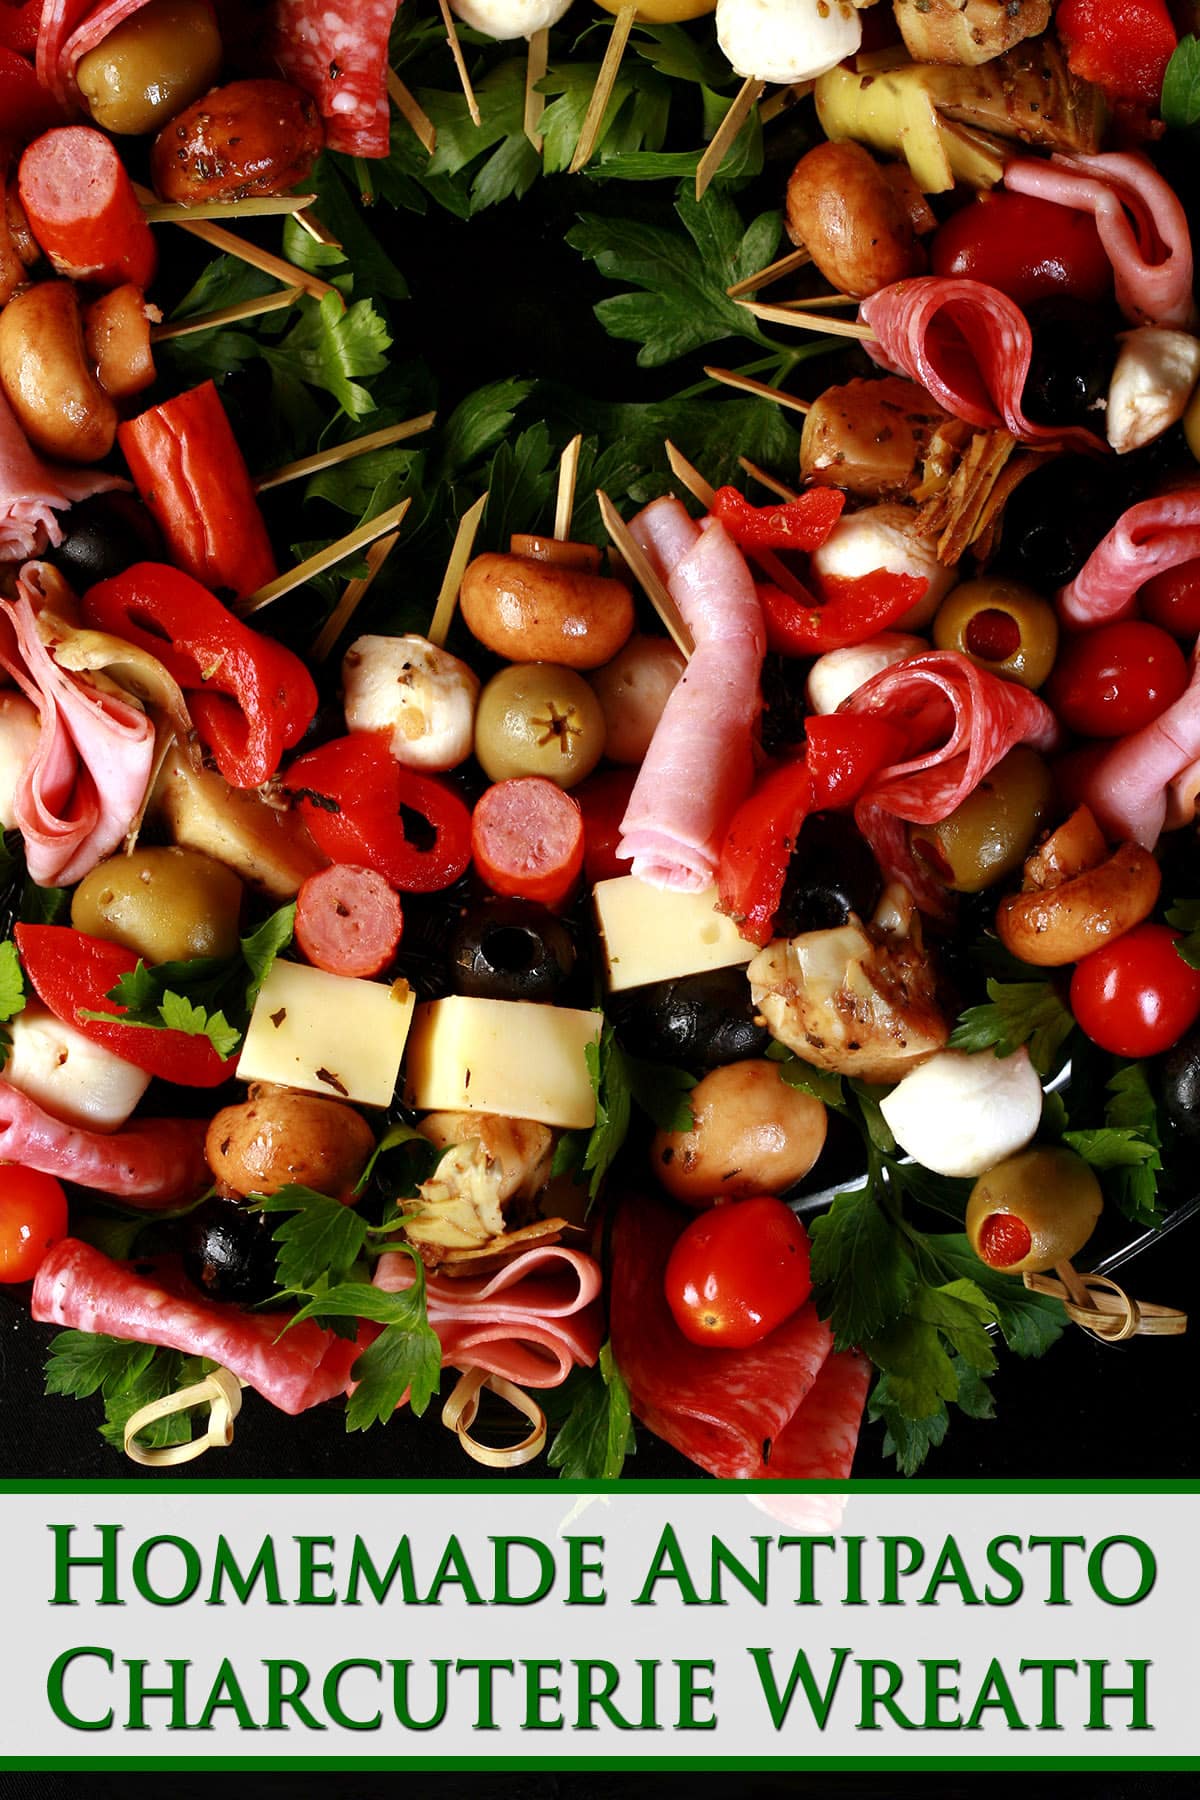 A wreath shaped charcuterie board, made up of antipasto skewers featuring various meats, cheeses, and olives.  Green text says homemade antipasto charcuterie wreath.